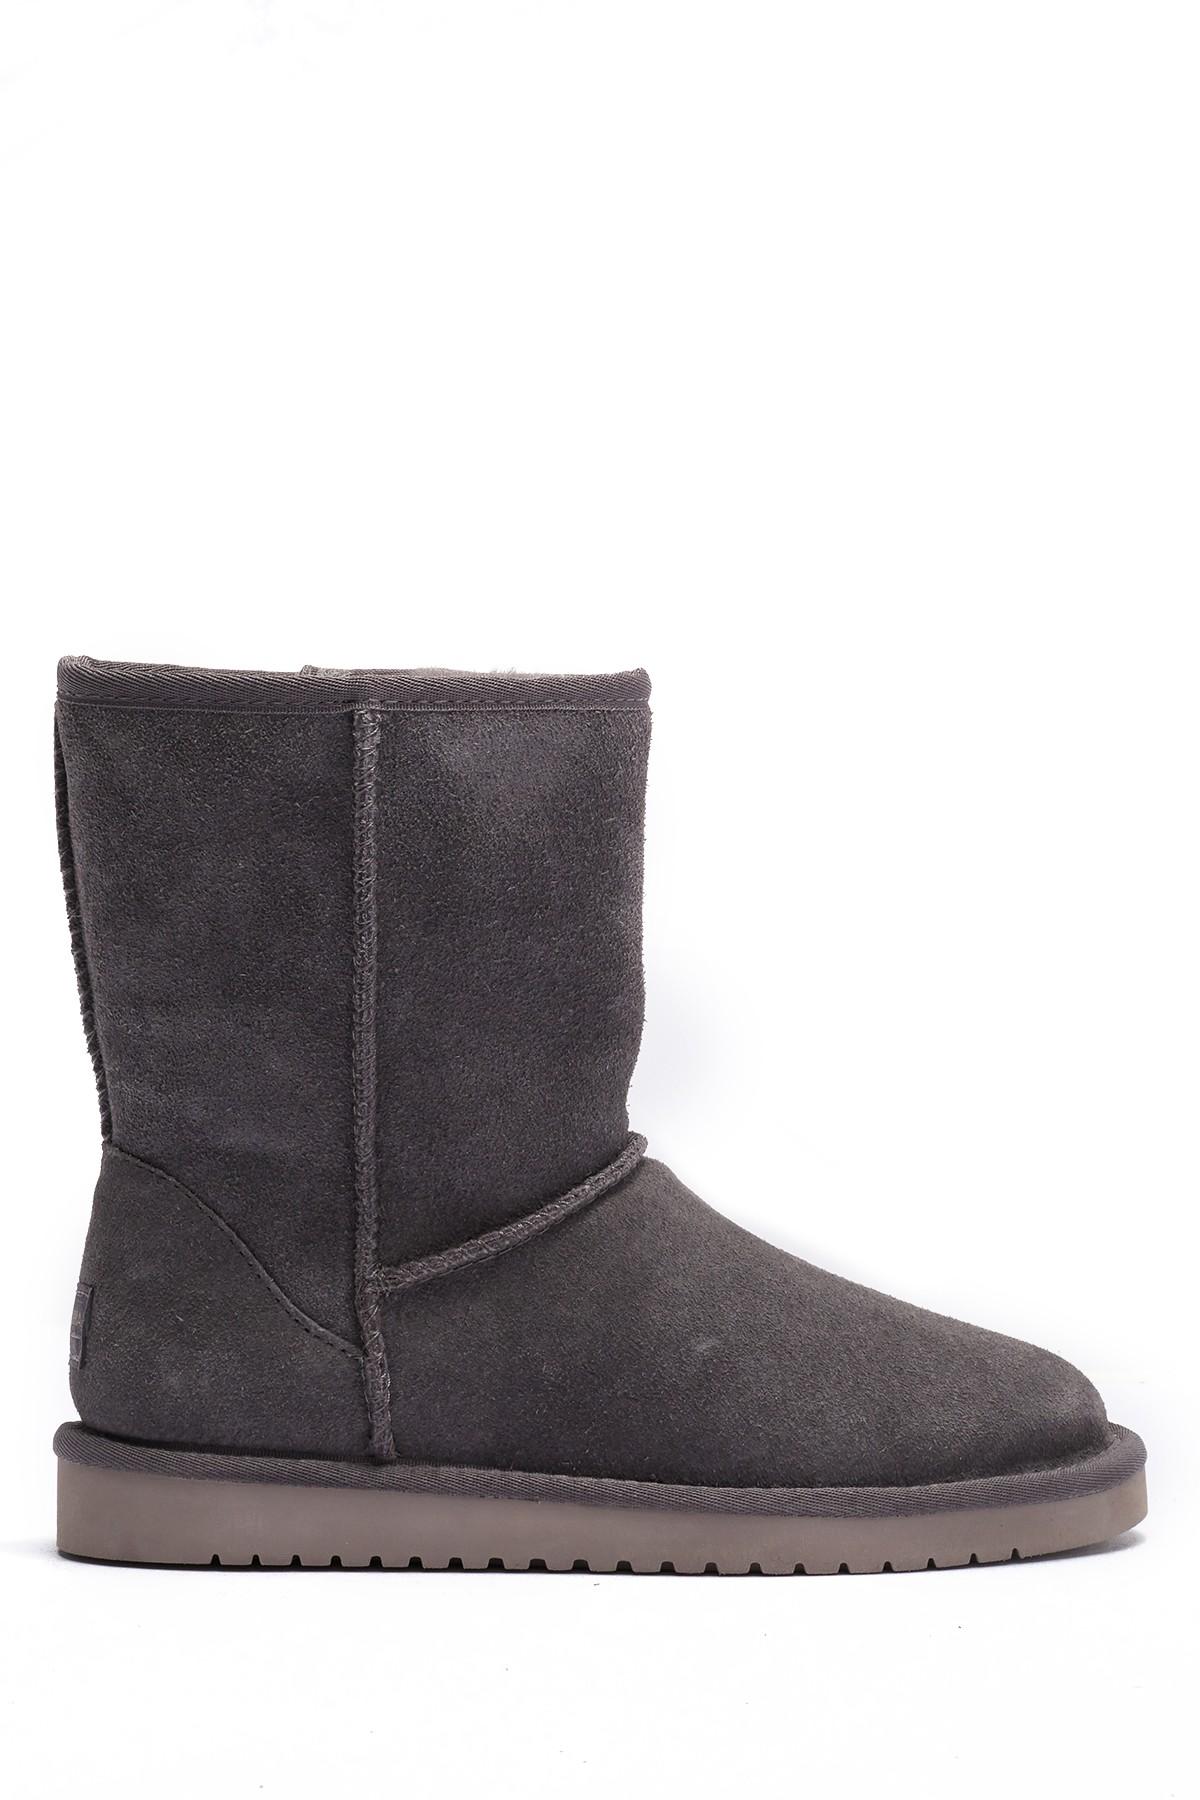 UGG Classic Short Genuine Shearling & Faux Fur Lined Boot - Wide Width ...